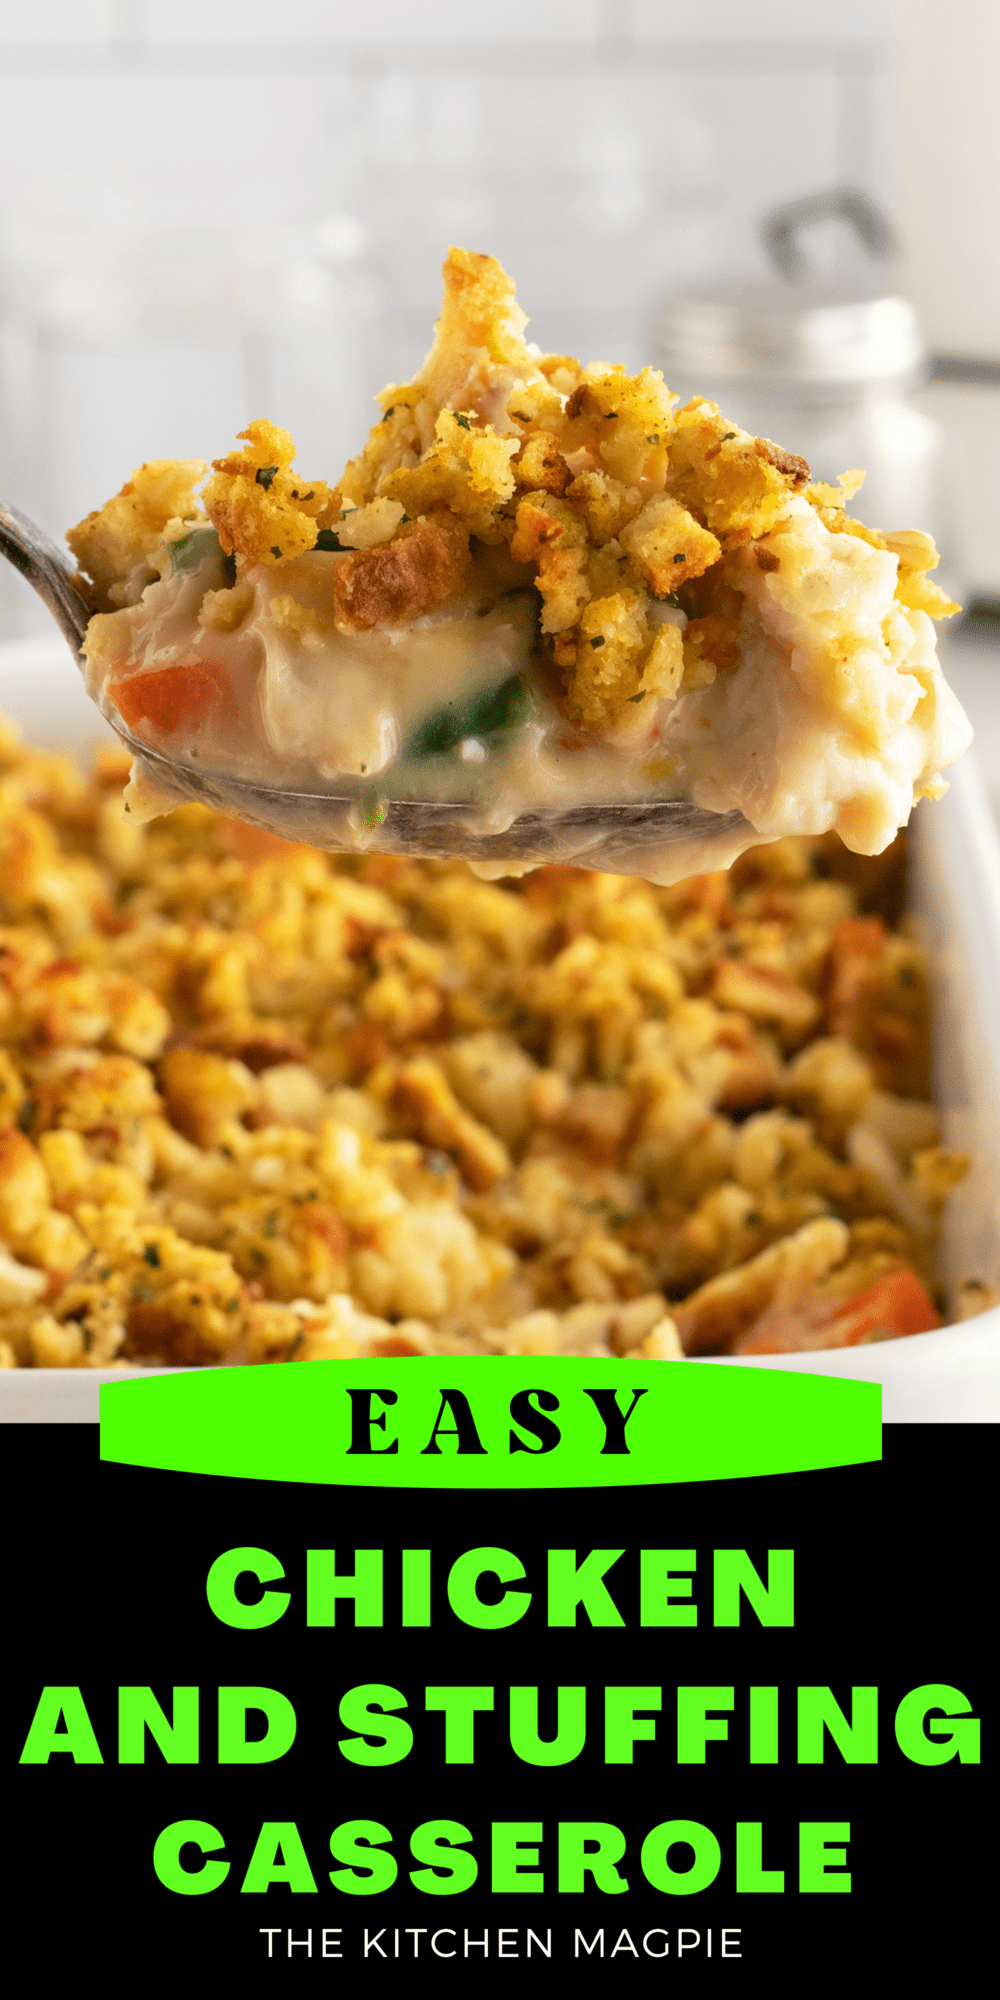 This super simple weekday casserole is the perfect way to use up the leftover chicken while also packing those all-important vegetables into your diet.